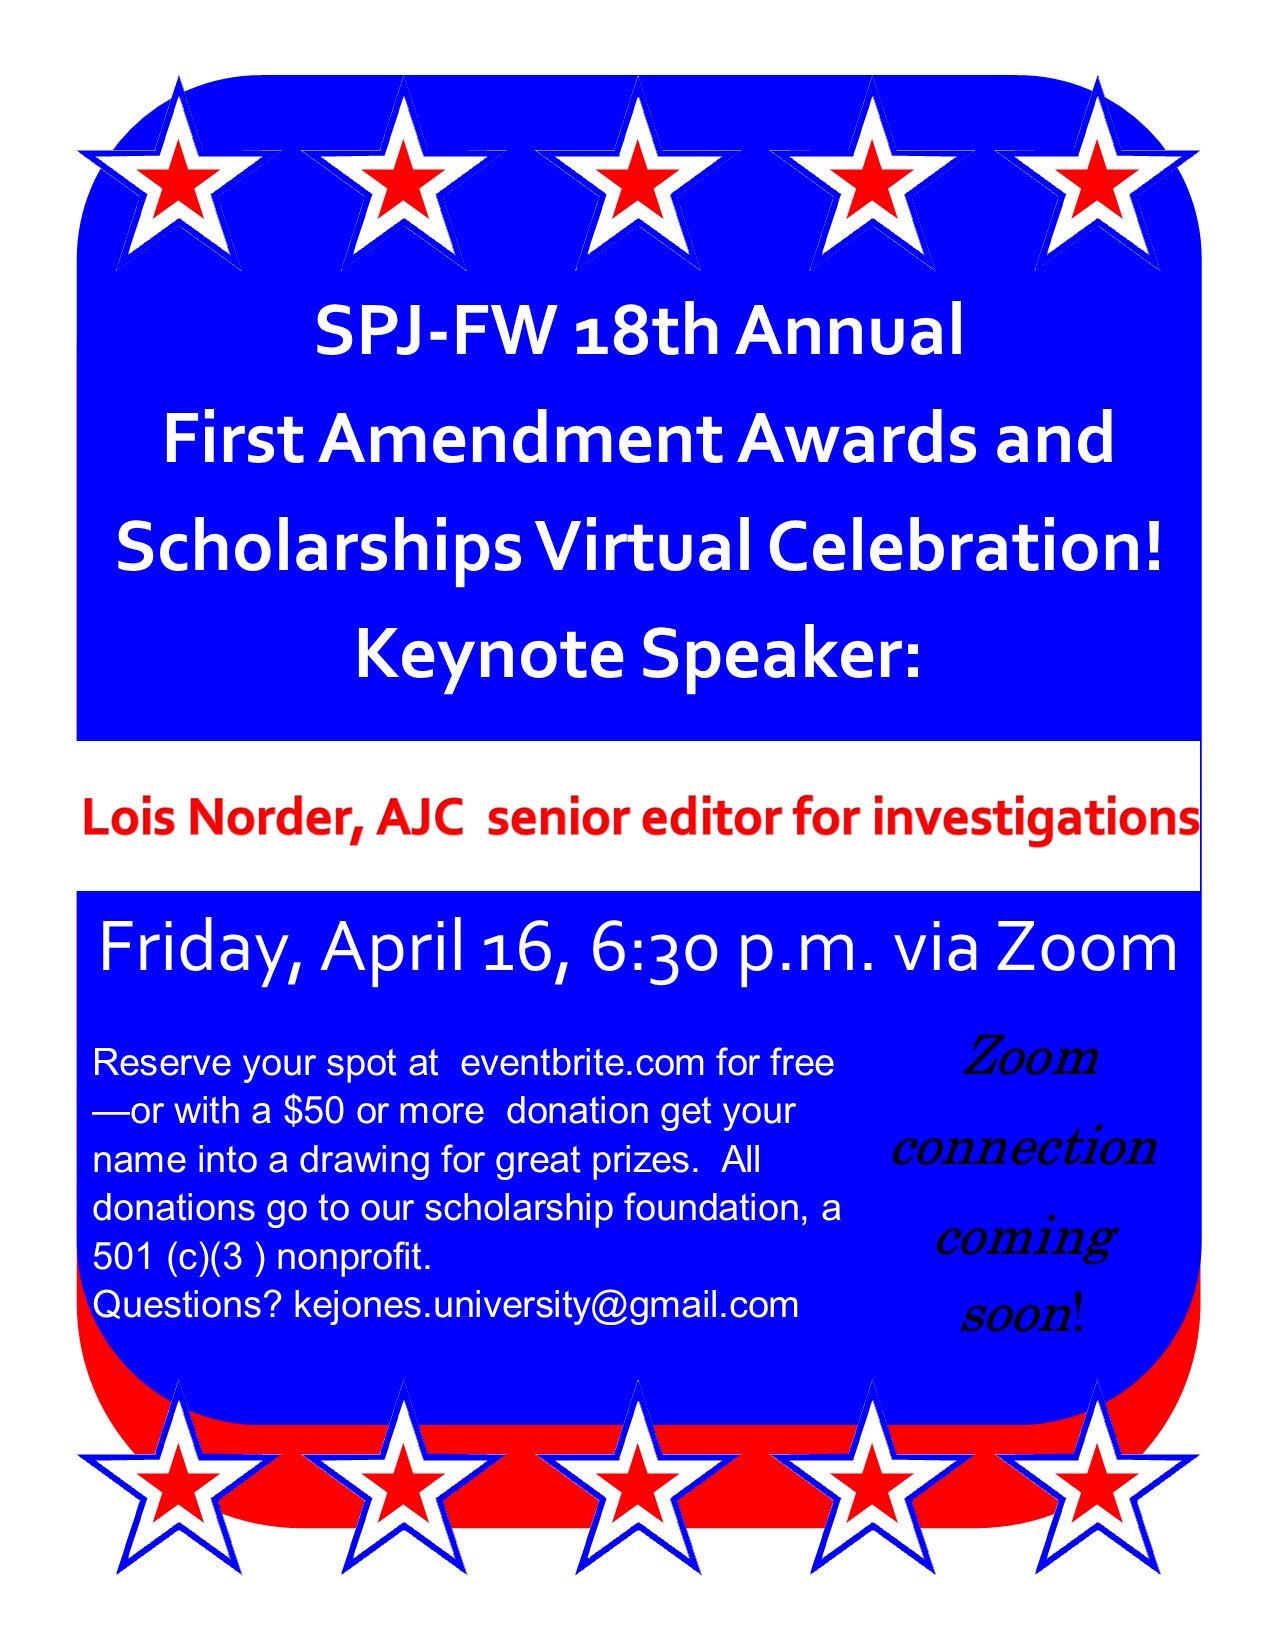 Spj Fw 18th Annual First Amendment Awards And Scholarships Virtual Celebration Friday April 16 6 30 P M Fort Worth Spj